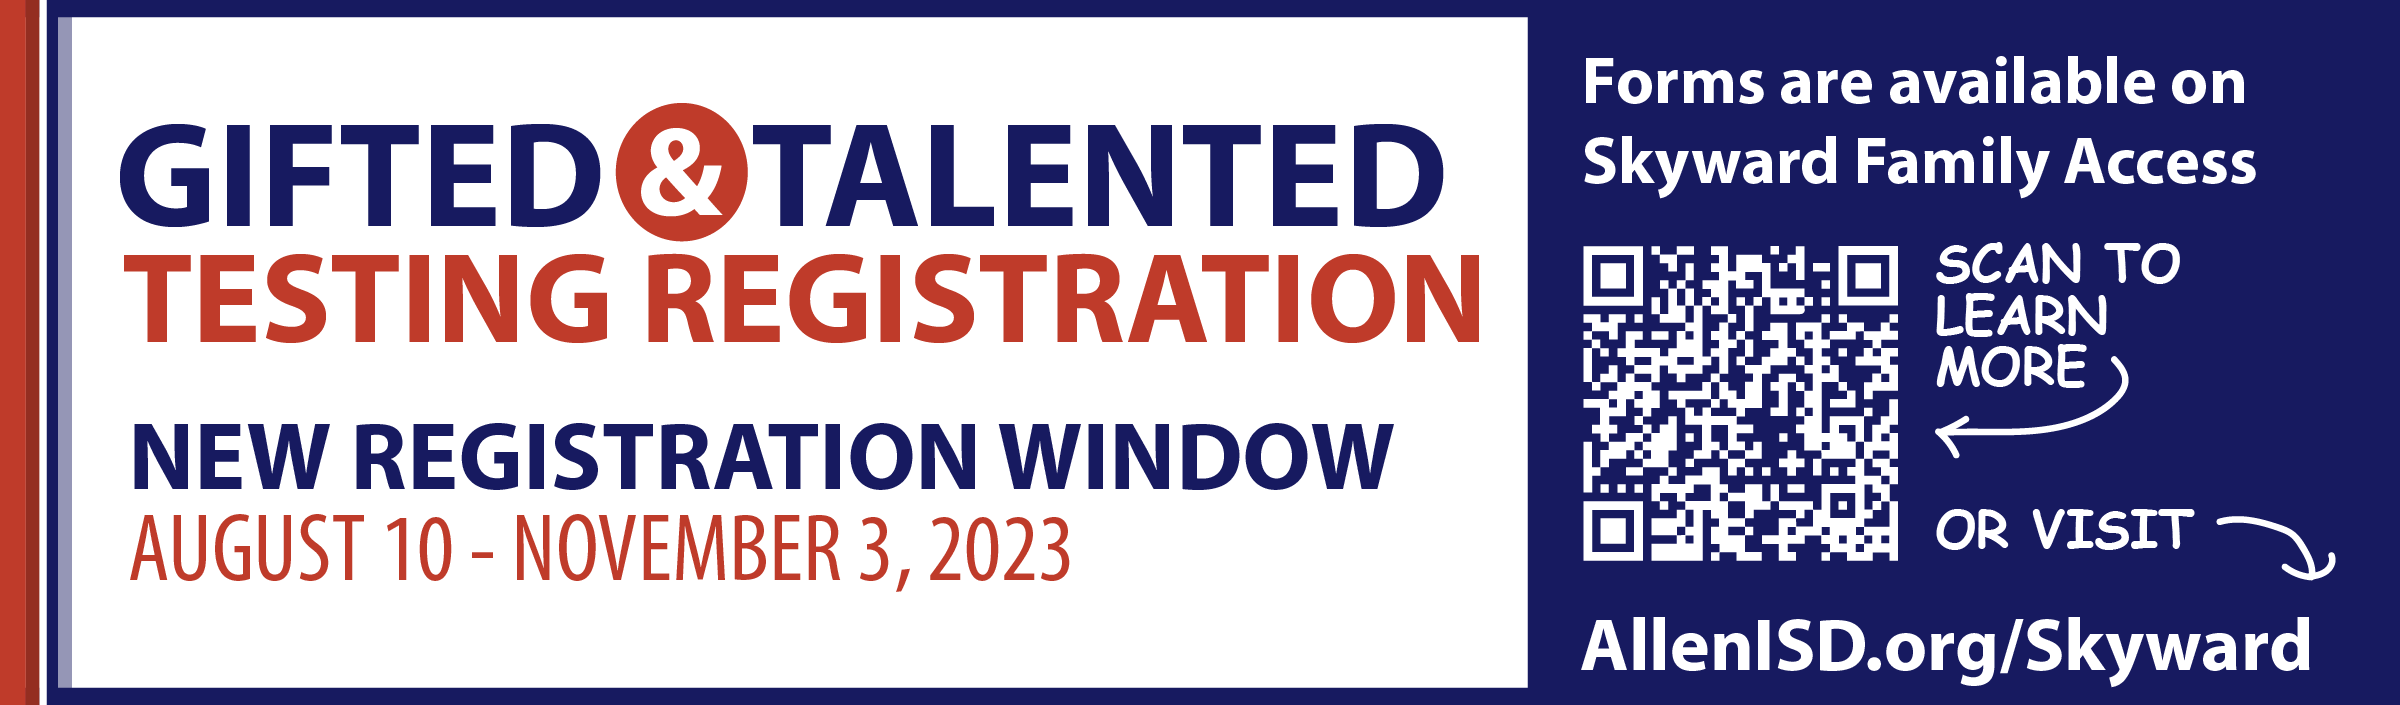 Gifted and talented registration window